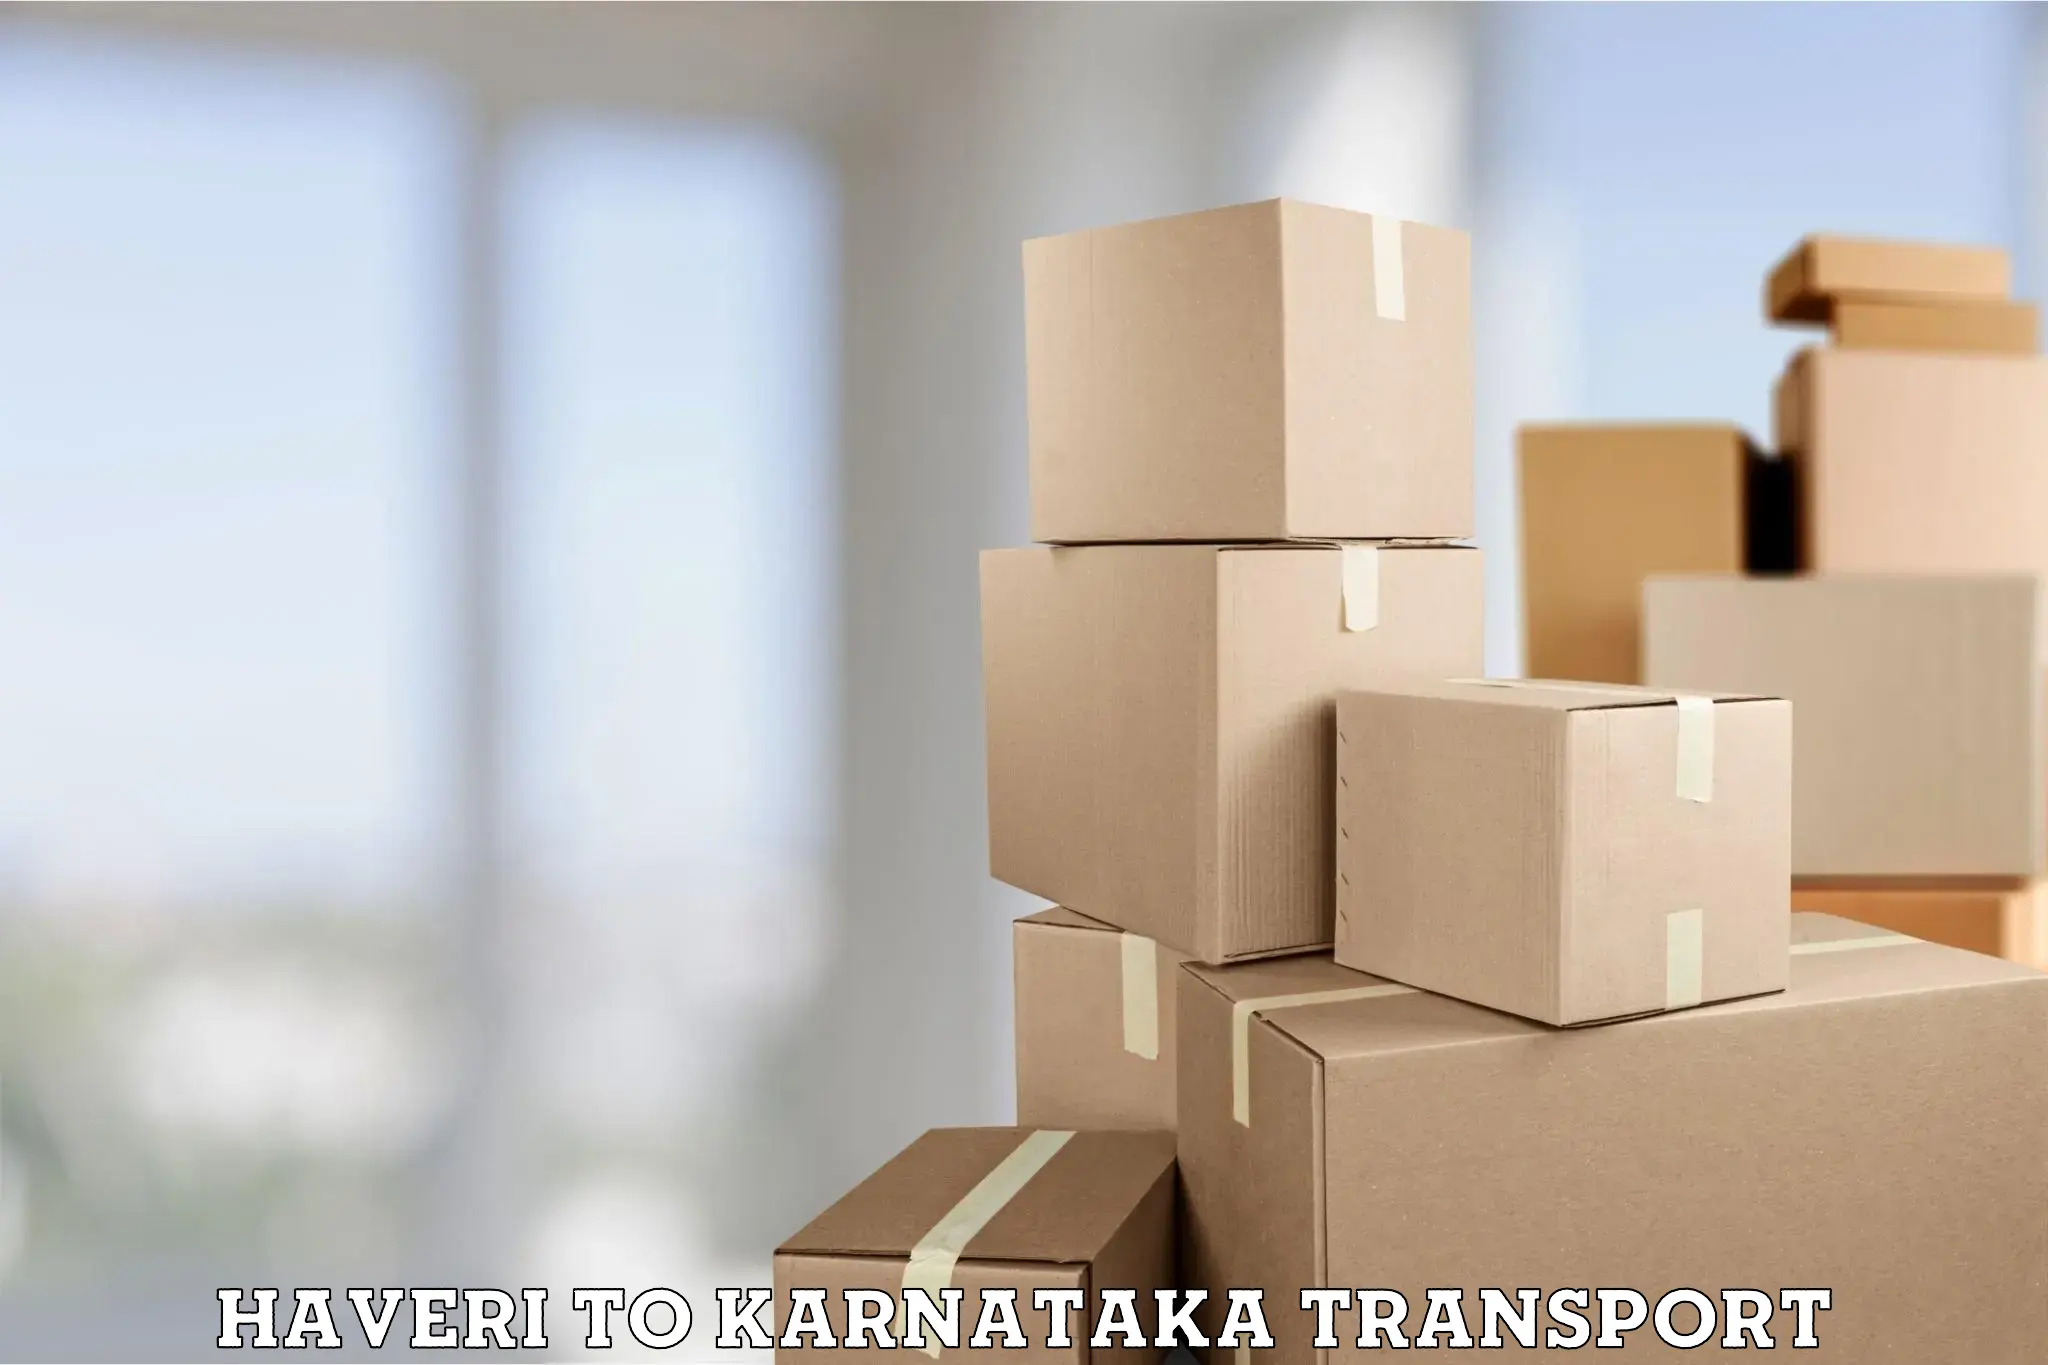 Daily parcel service transport in Haveri to Mangalore Port